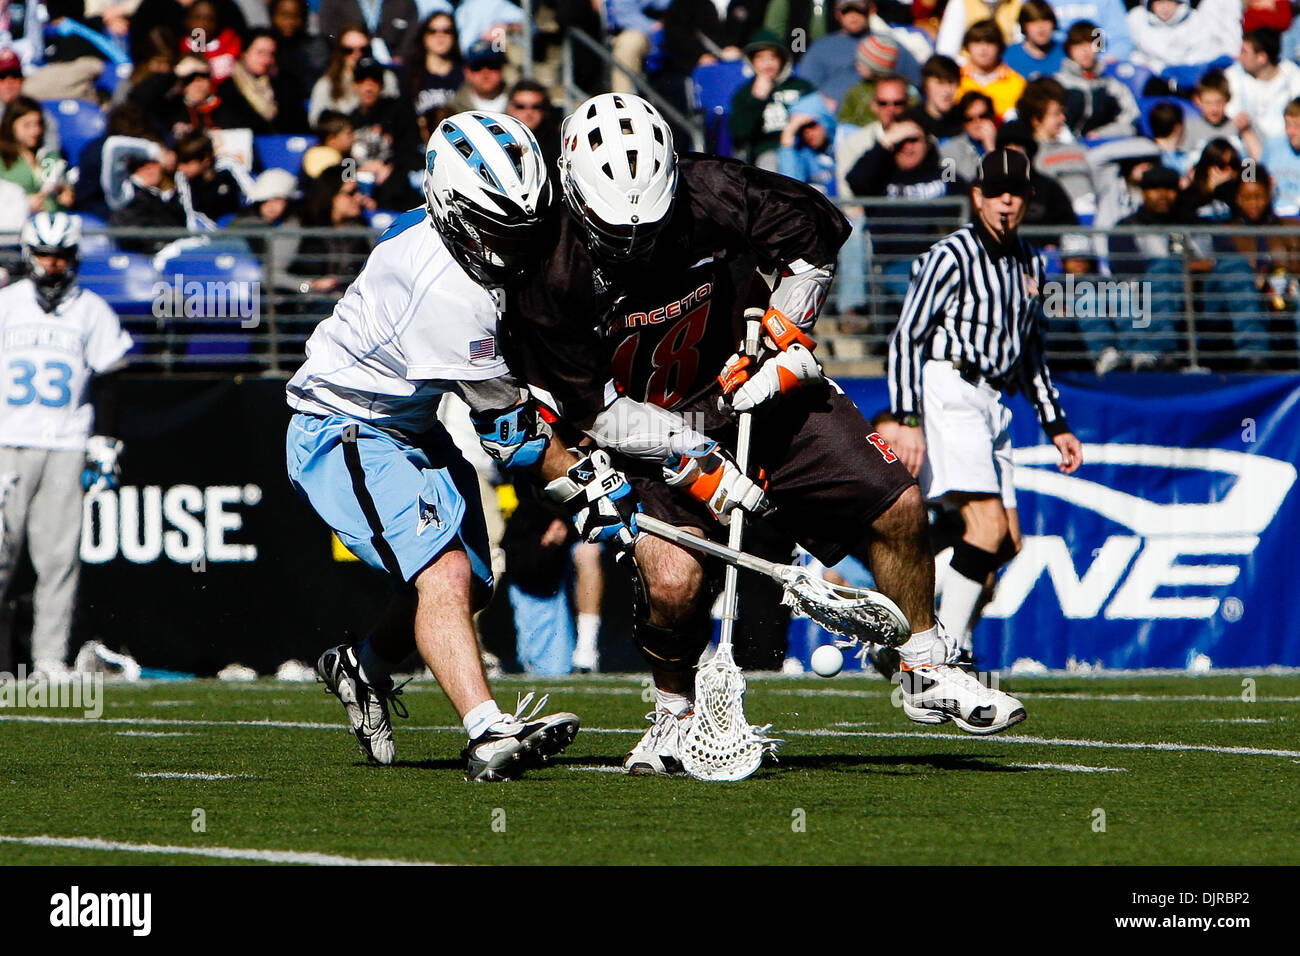 Mar. 06, 2010 - Baltimore, Maryland, U.S - 06 March 2010: Hopkins Midfield Matt Dolente #4 and Princeton Midfield Jeff Froccaro #18 fight for the ball in action during the Princeton versus John Hopkins lacrosse game at the Konica Minolta Face-Off Classic held at M&T Bank Stadium.  The Princeton Tigers were able to defeat the Hopkins Blue Jays in overtime 11-10. (Credit Image: © Ale Stock Photo